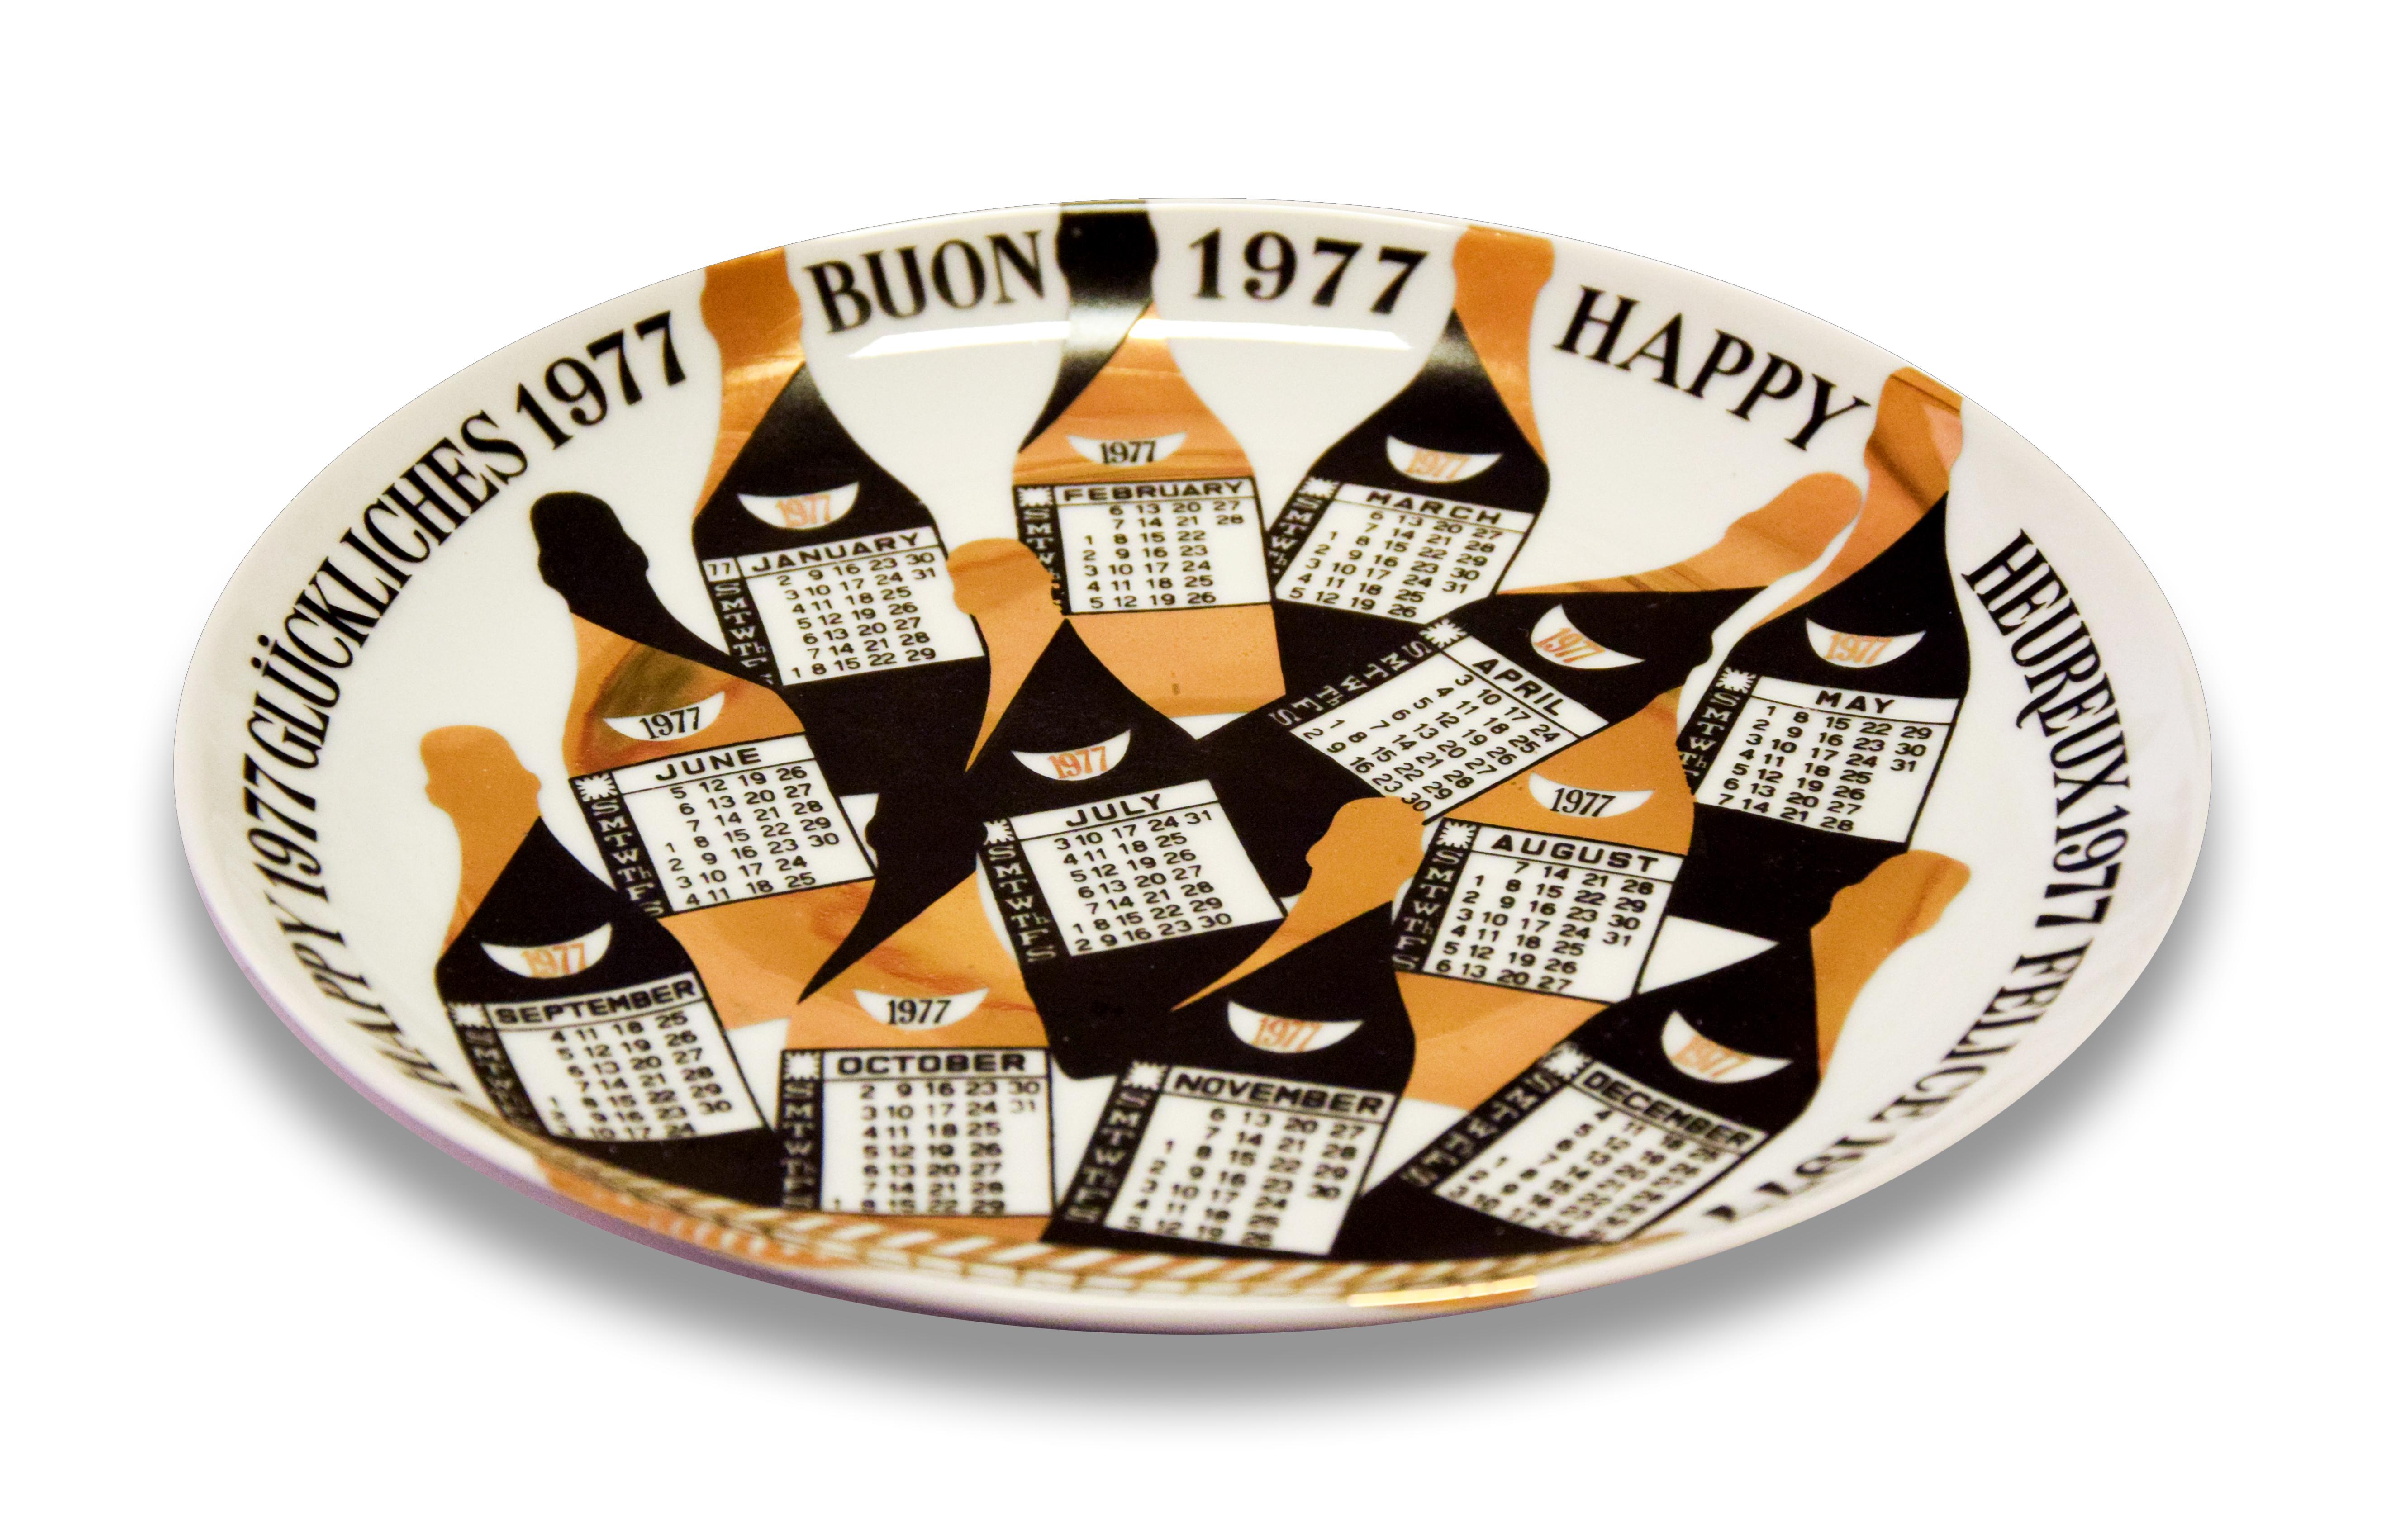 Buon 1977 Calendario is a silk-screened porcelain plate, designed by Piero Fornasetti in 1977 from the Calendario series, the Happy New Year dishes series. 

In very good conditions.

Black and white ceramic Fornasetti wall plate, illustrated with